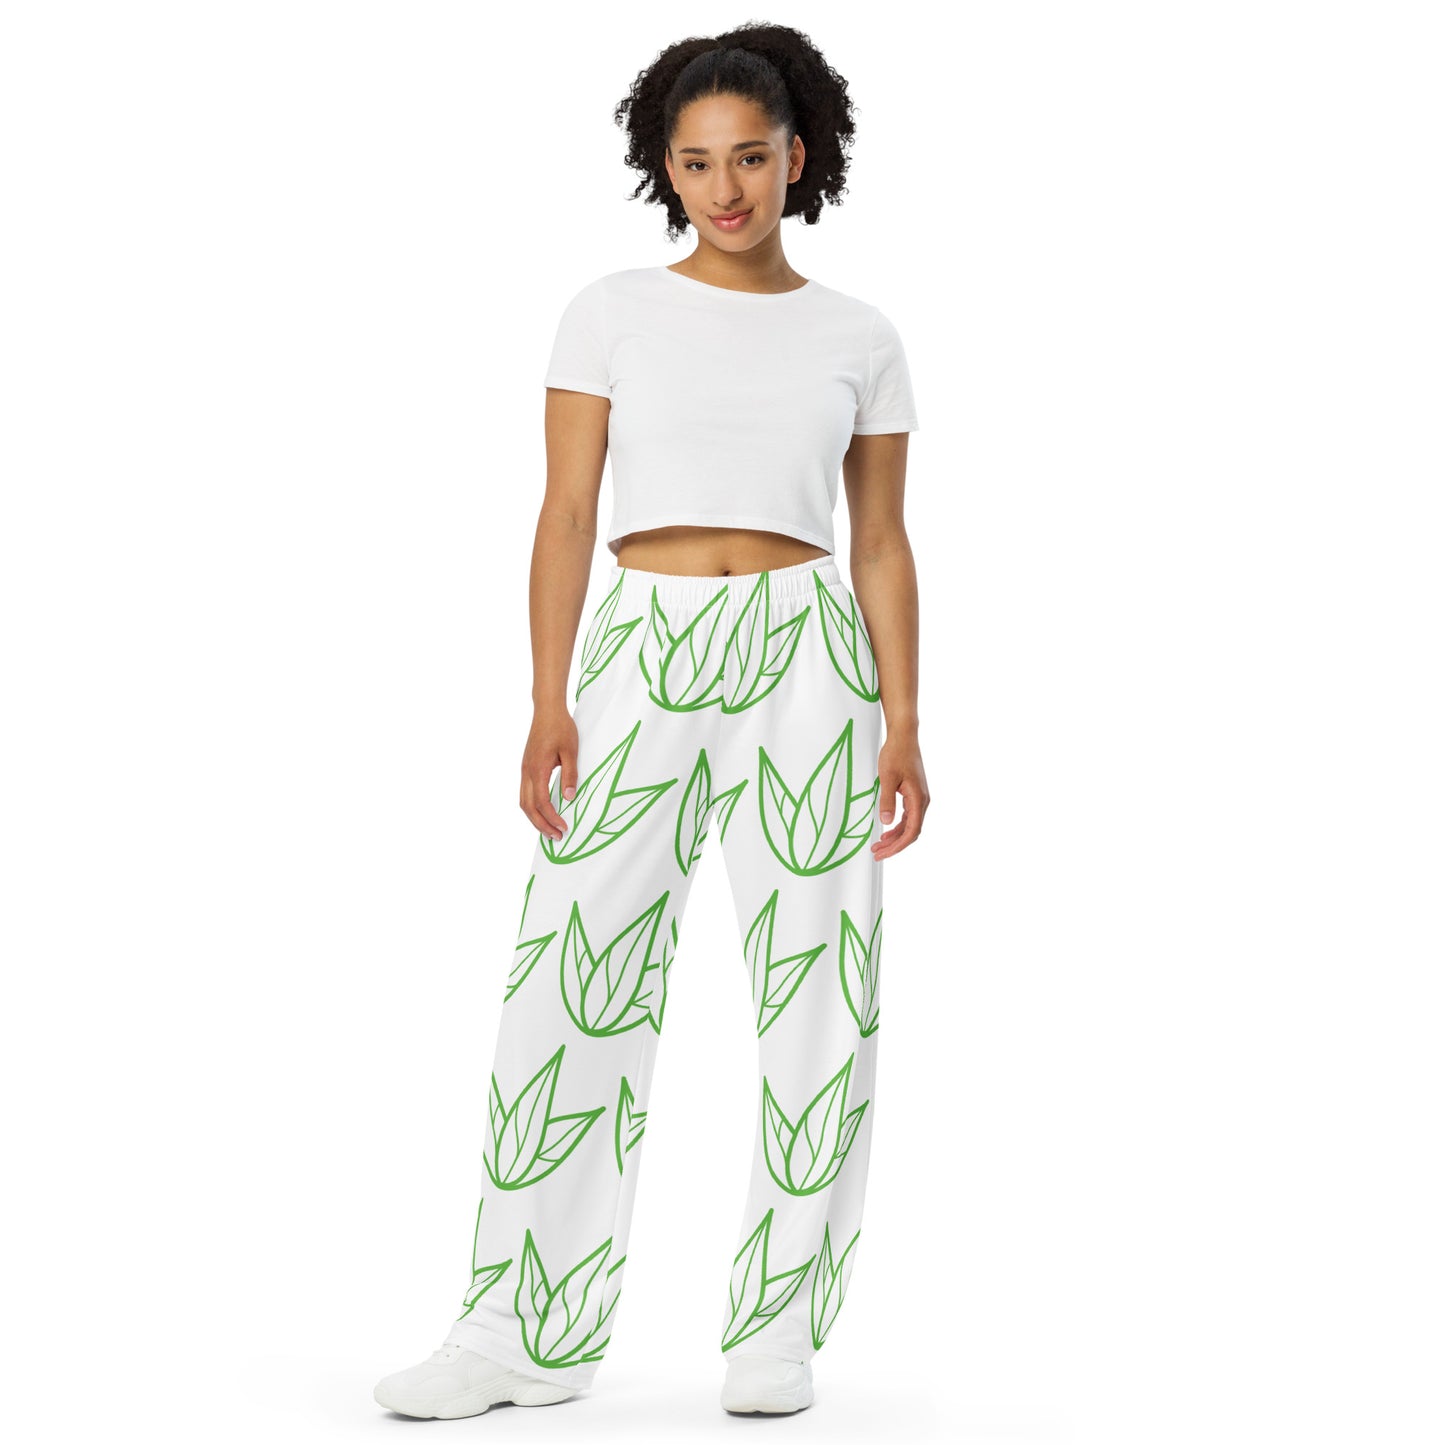 Vibrant Visions - Organic Health & Wellness - All-over HD print, unisex, Casual Lounge Wear, House Wear, Wide-leg Comfortable pants